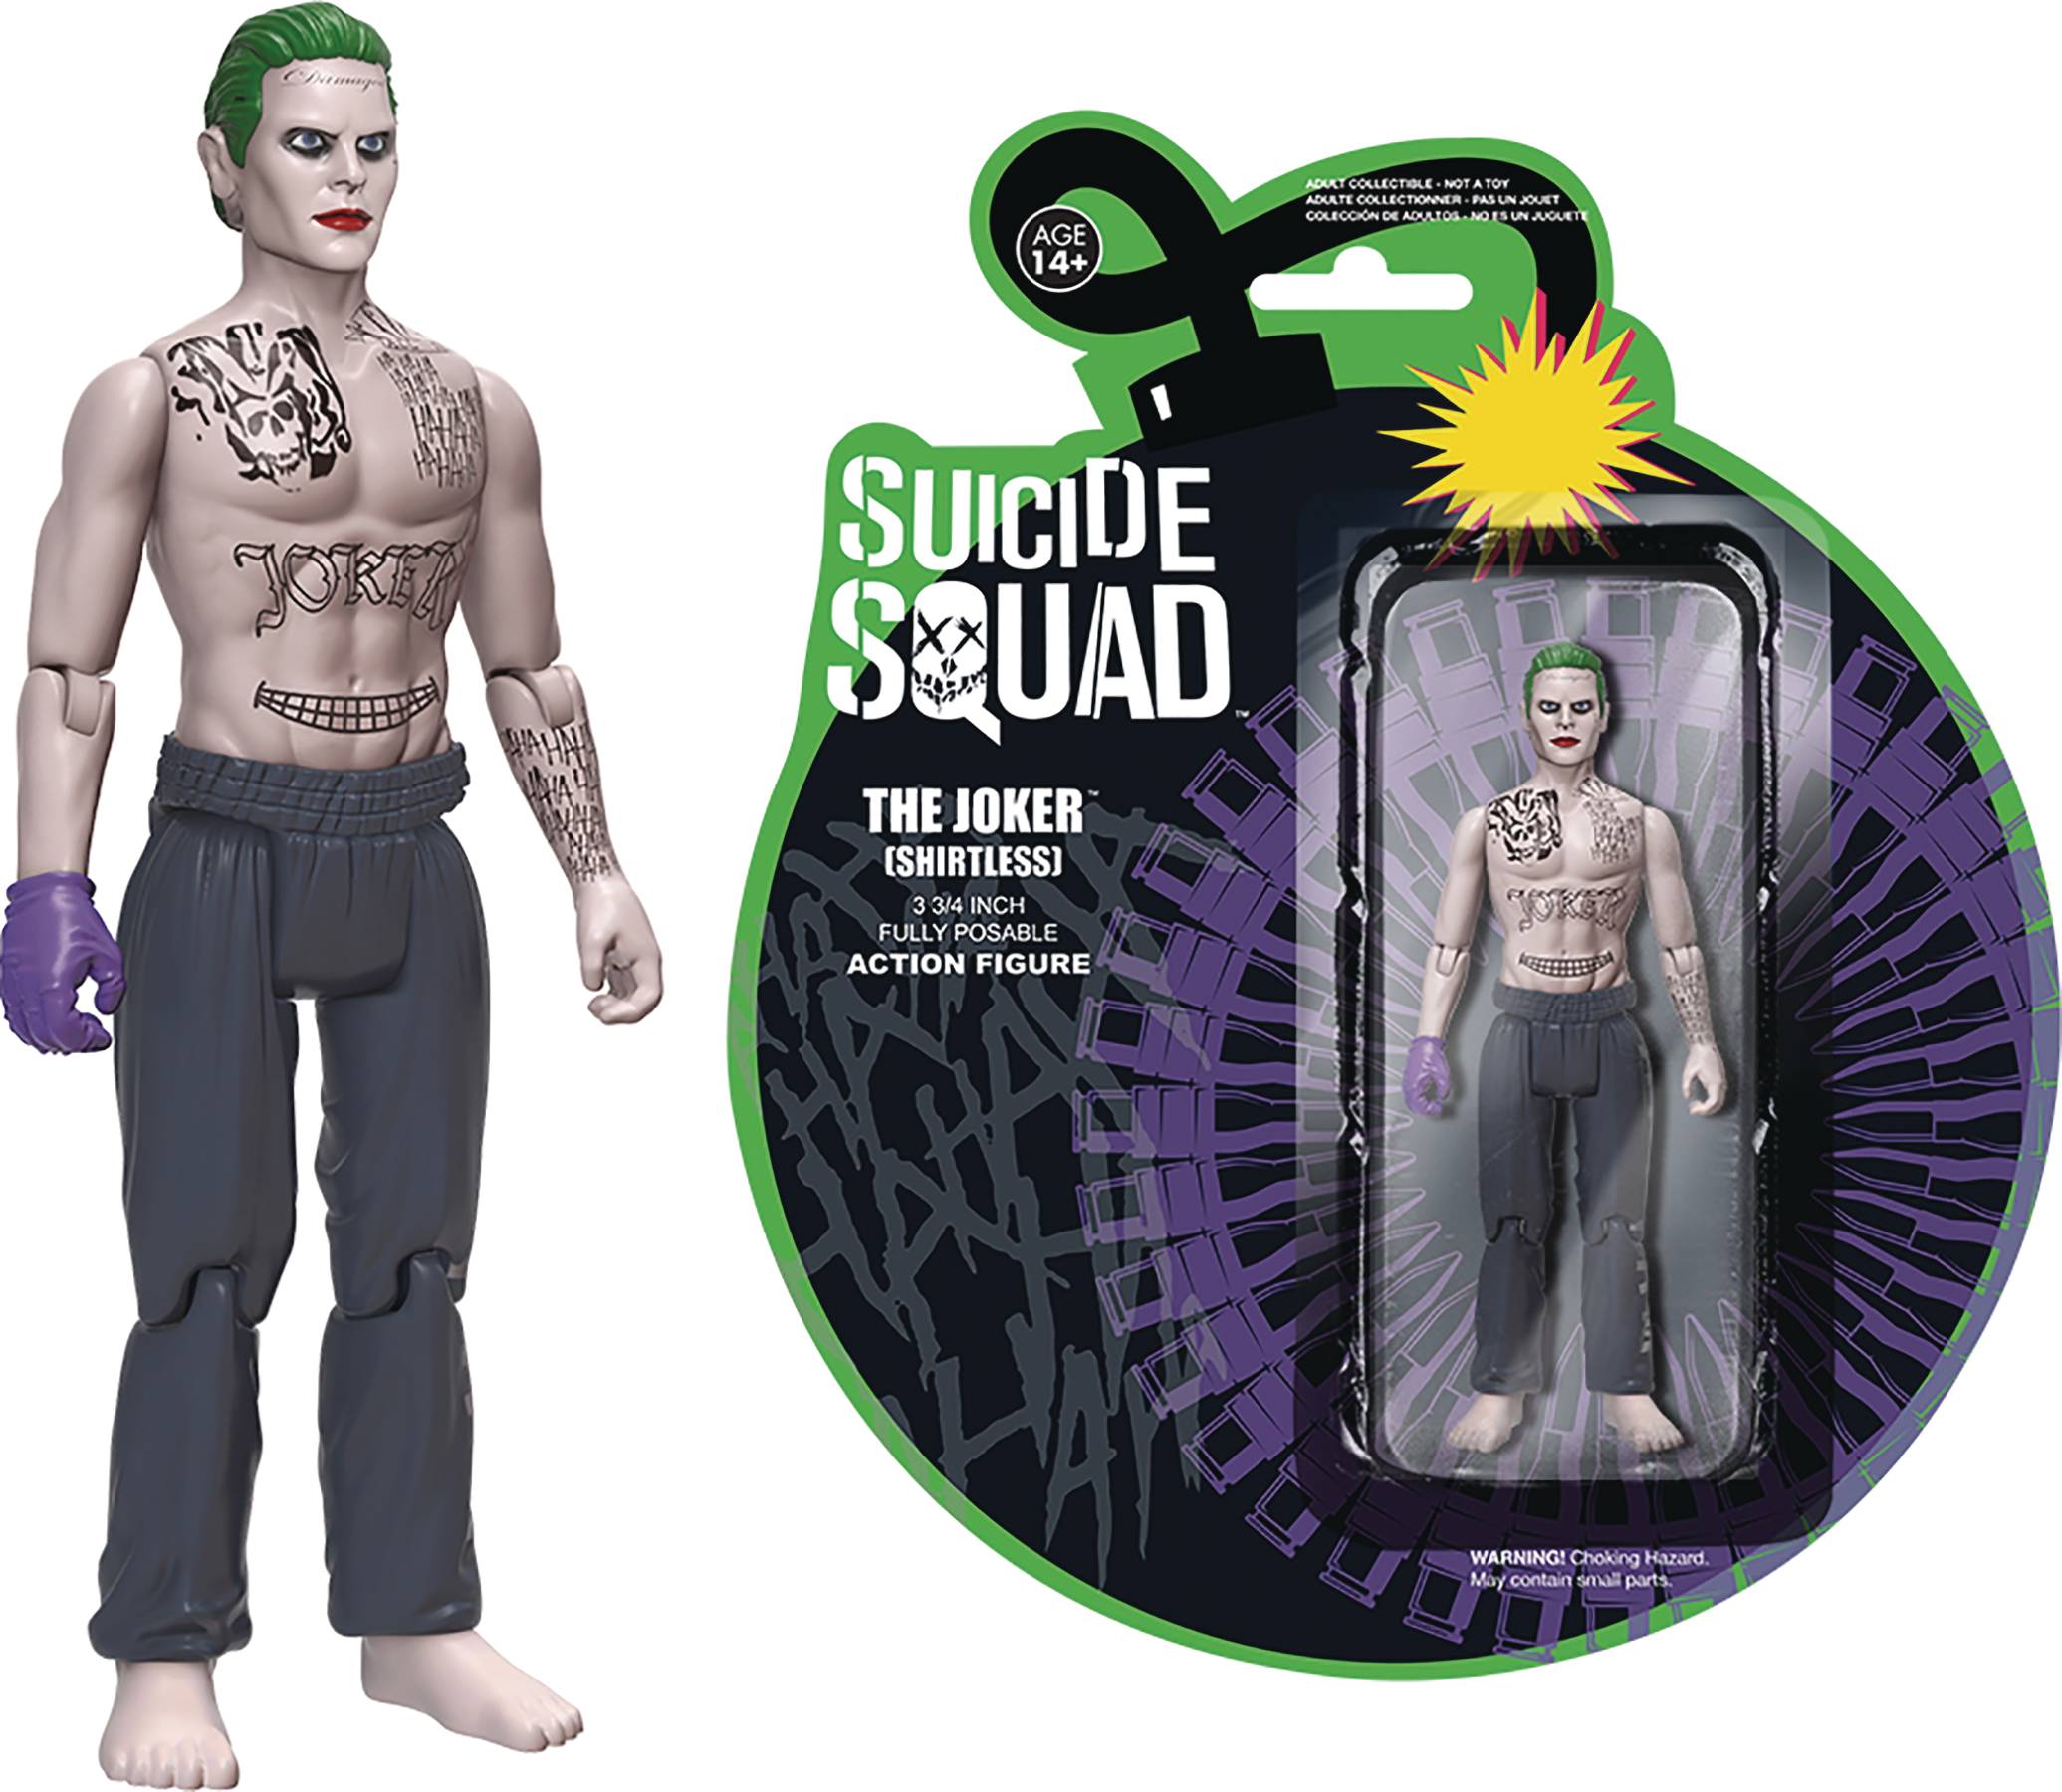 New Suicide Squad Action Figures From Funko - Previews World